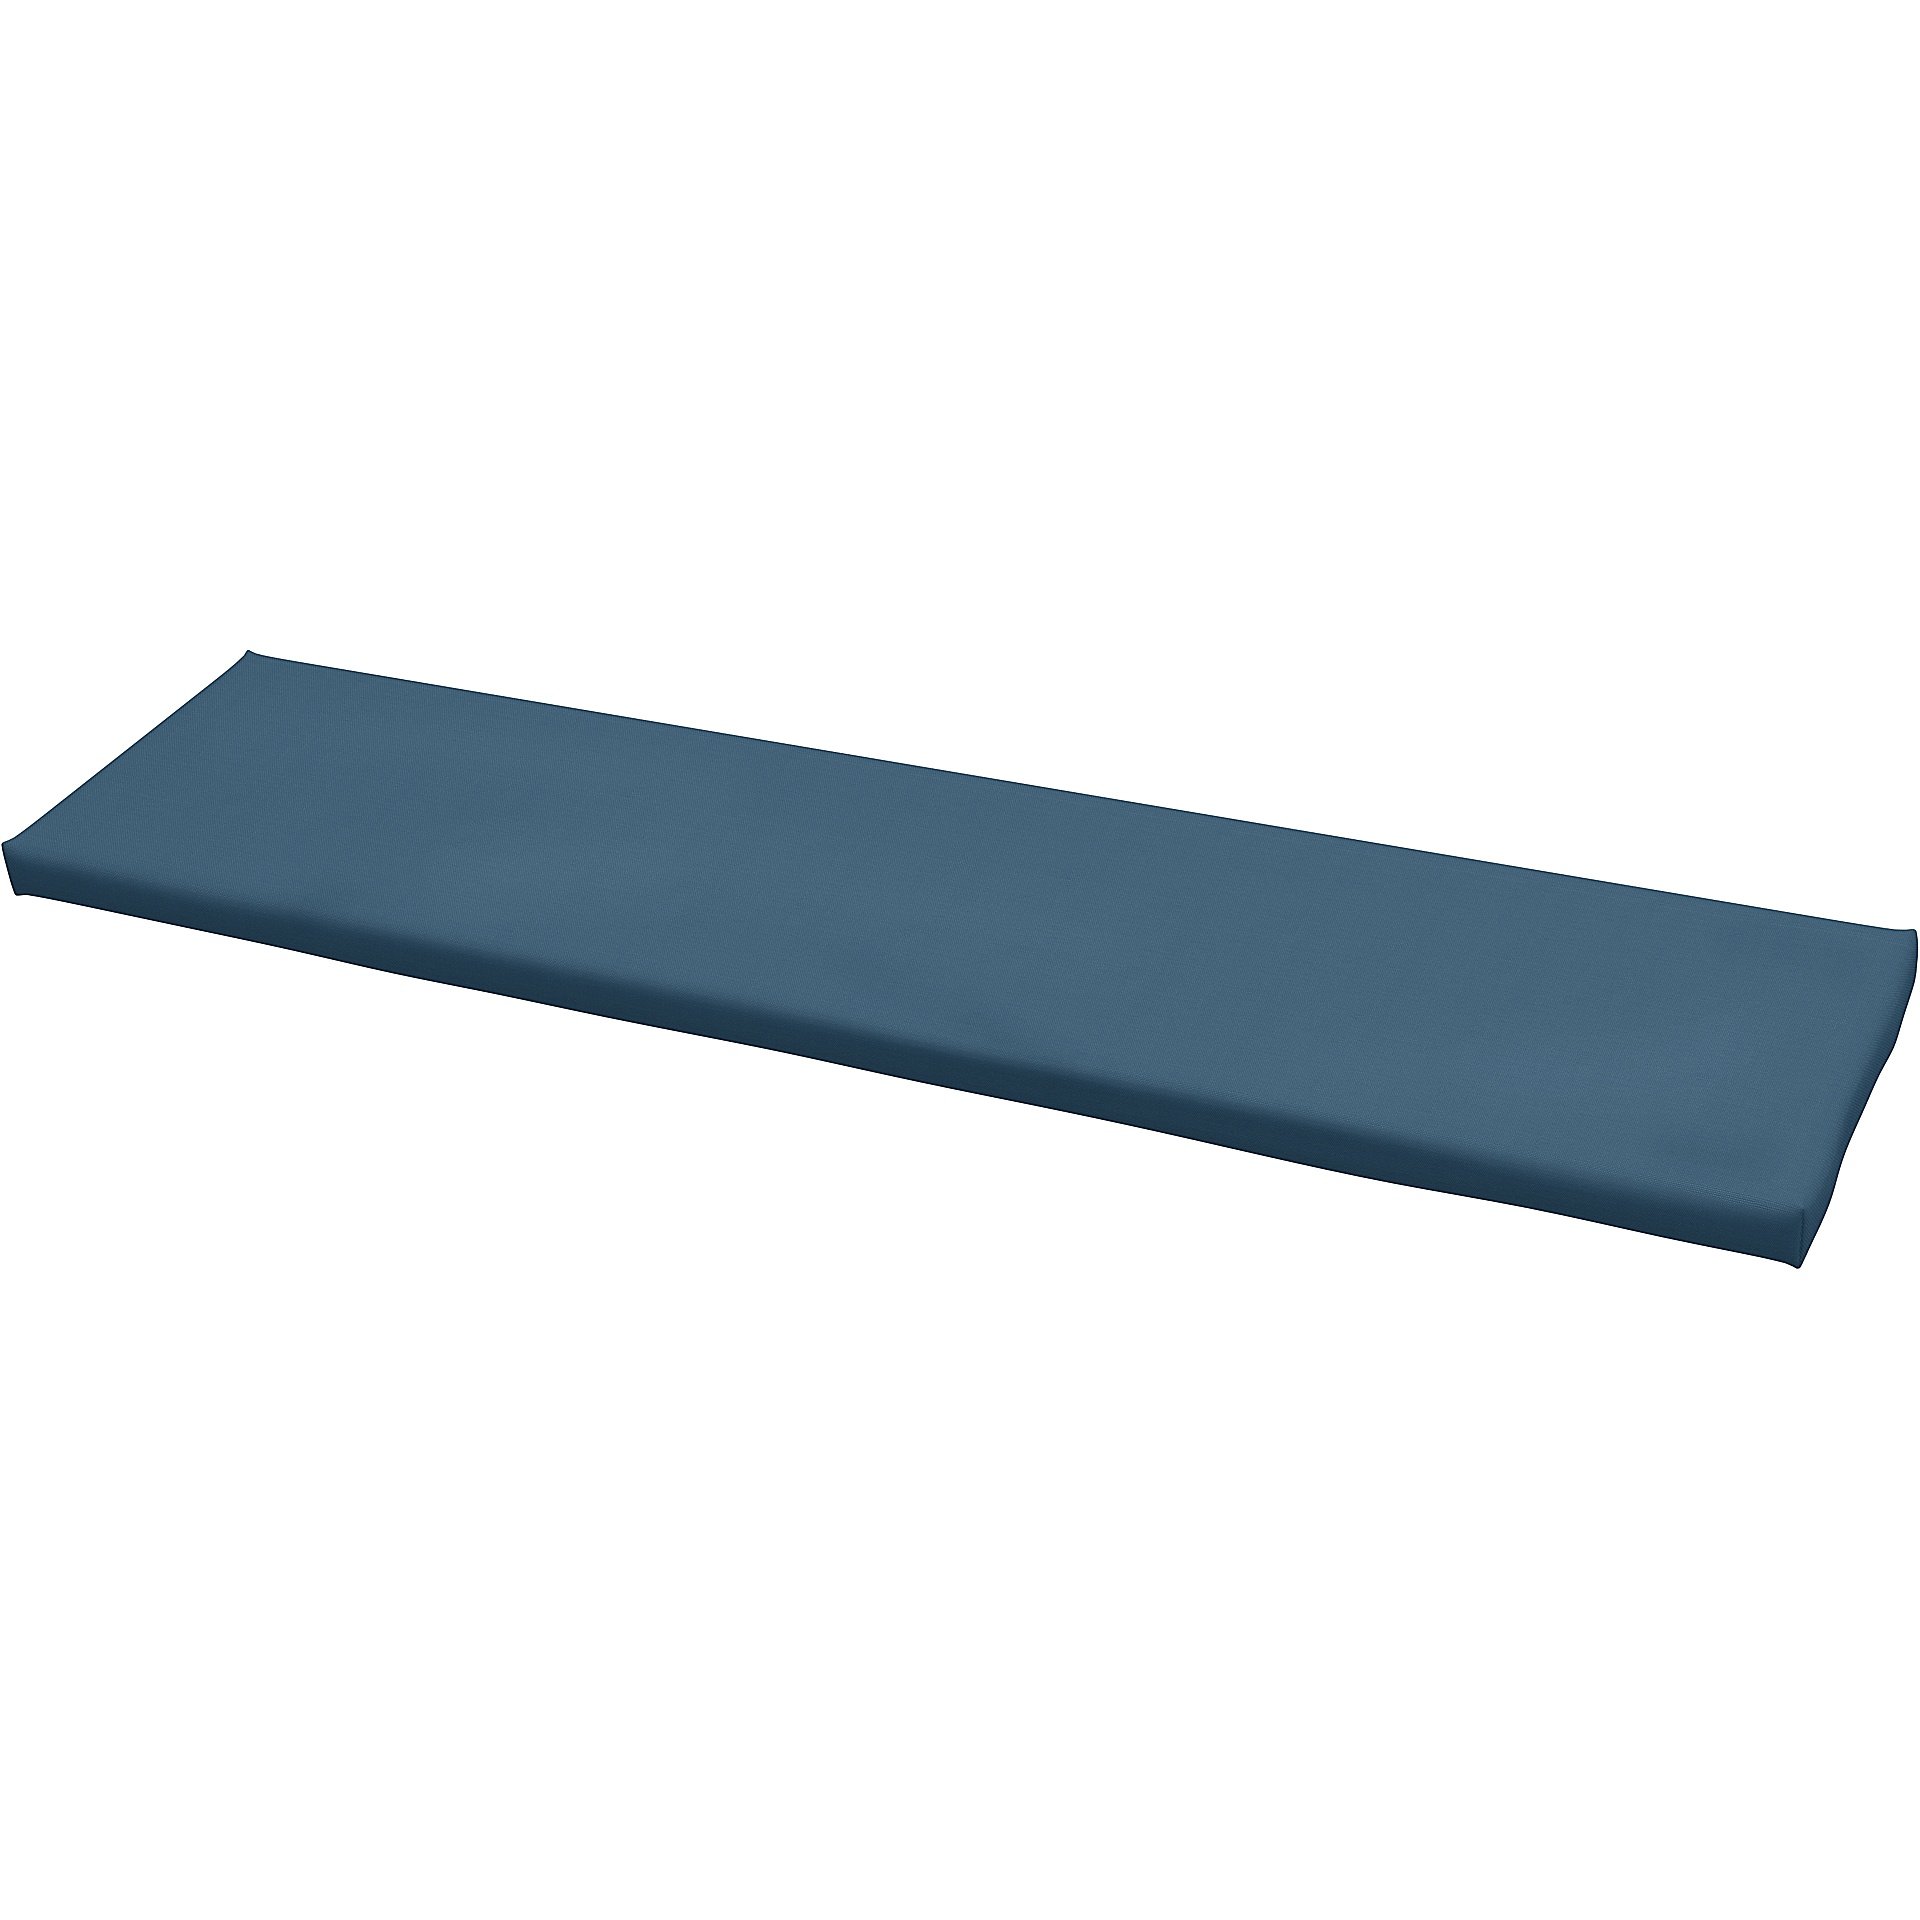 IKEA - Universal bench cushion cover 140x35x3,5 cm, Real Teal, Cotton - Bemz